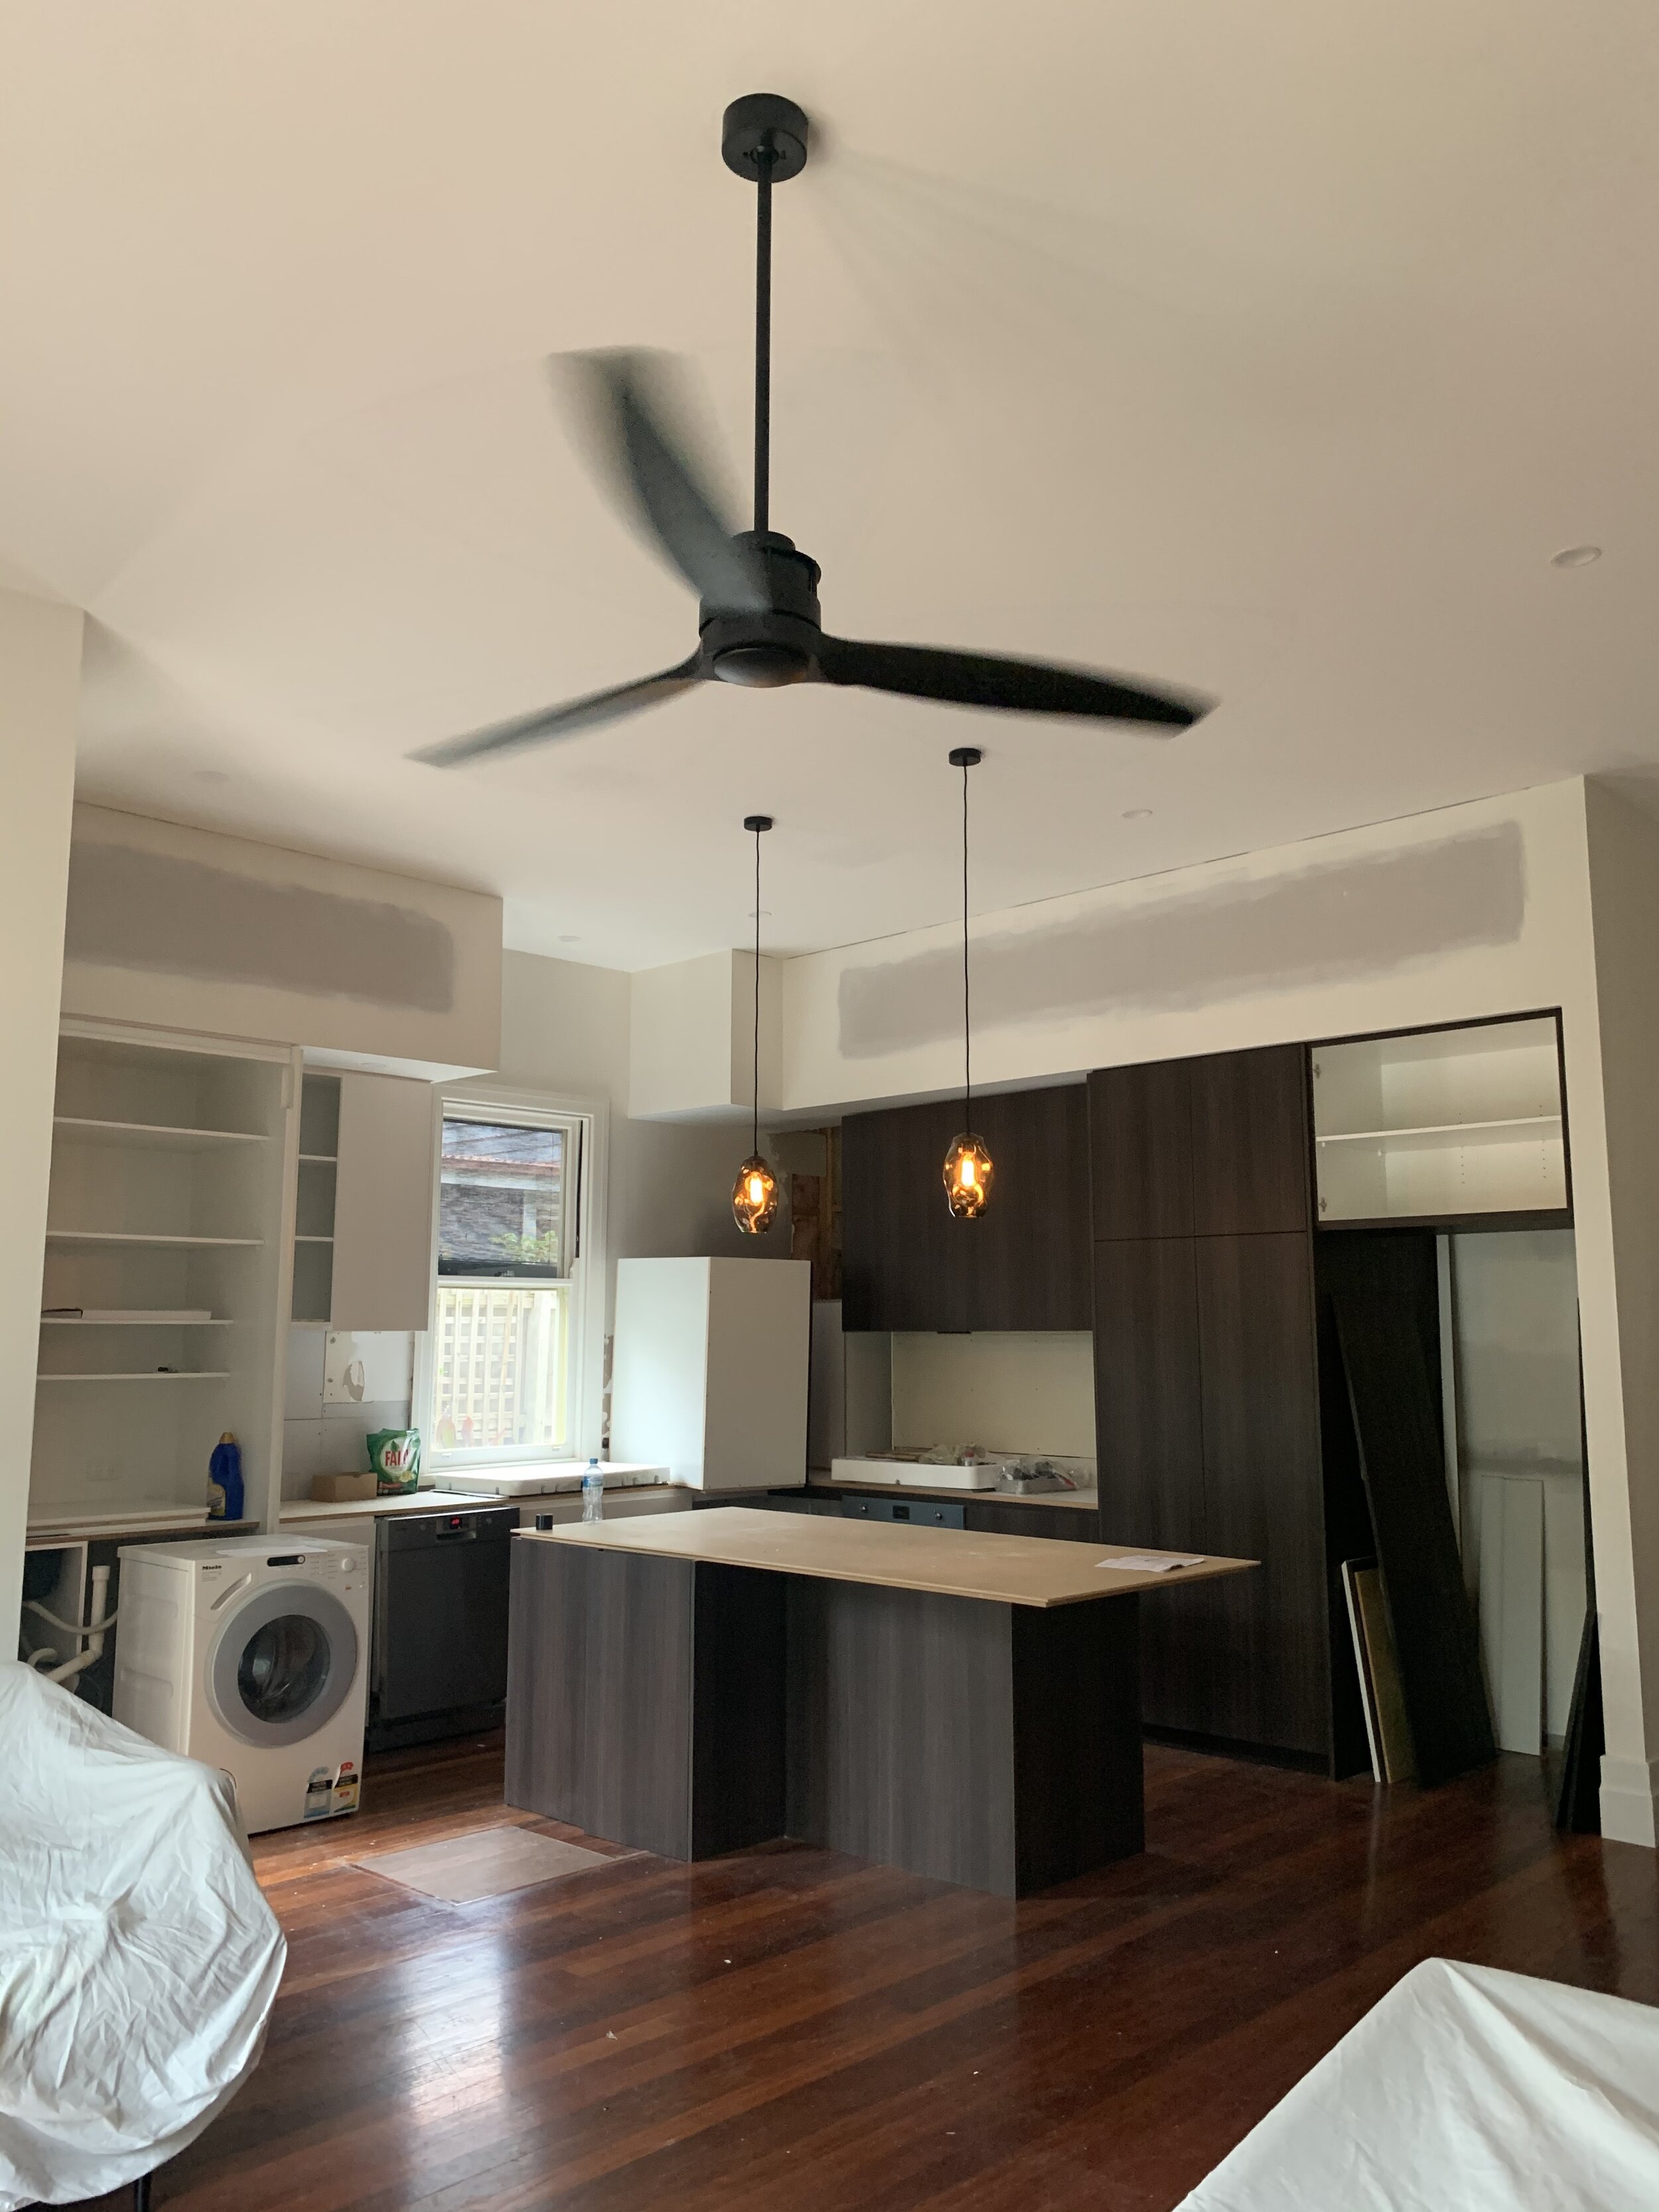 Kitchen renovation including new pendant lighting and ceiling fan